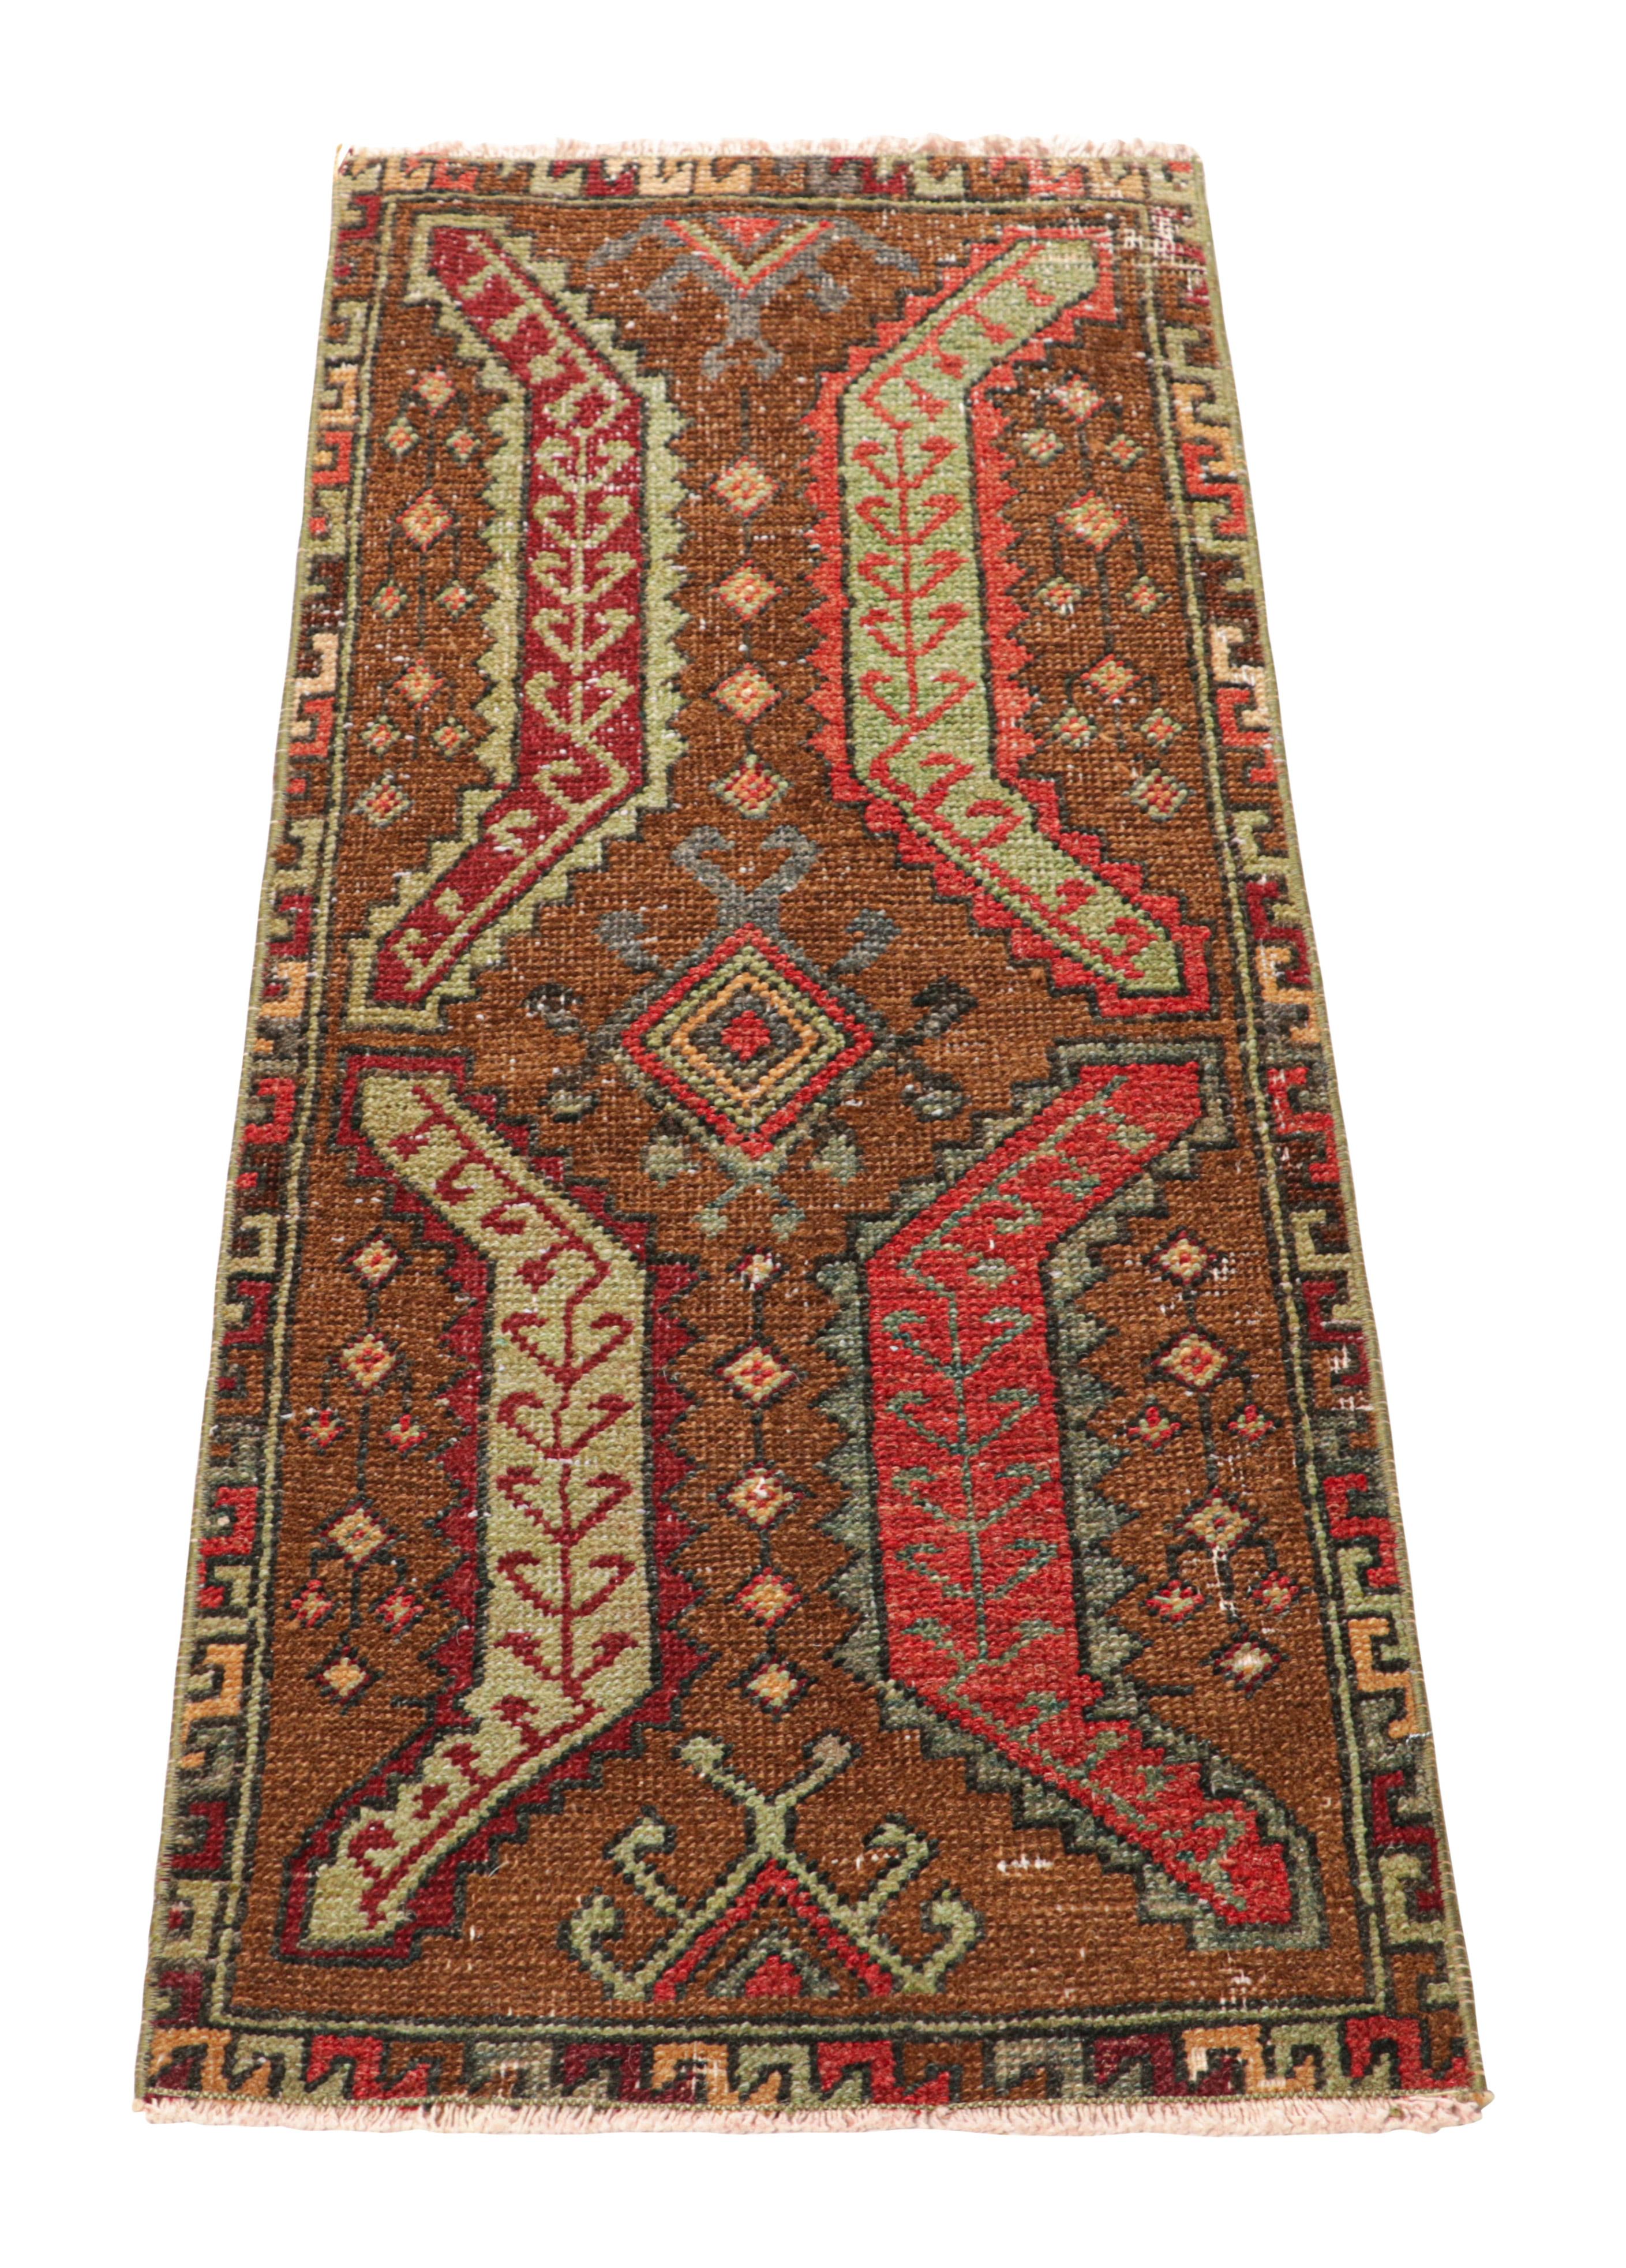 Vintage Oushak Rug in Beige-Brown, with Geometric Patterns, from Rug & Kilim In Good Condition For Sale In Long Island City, NY